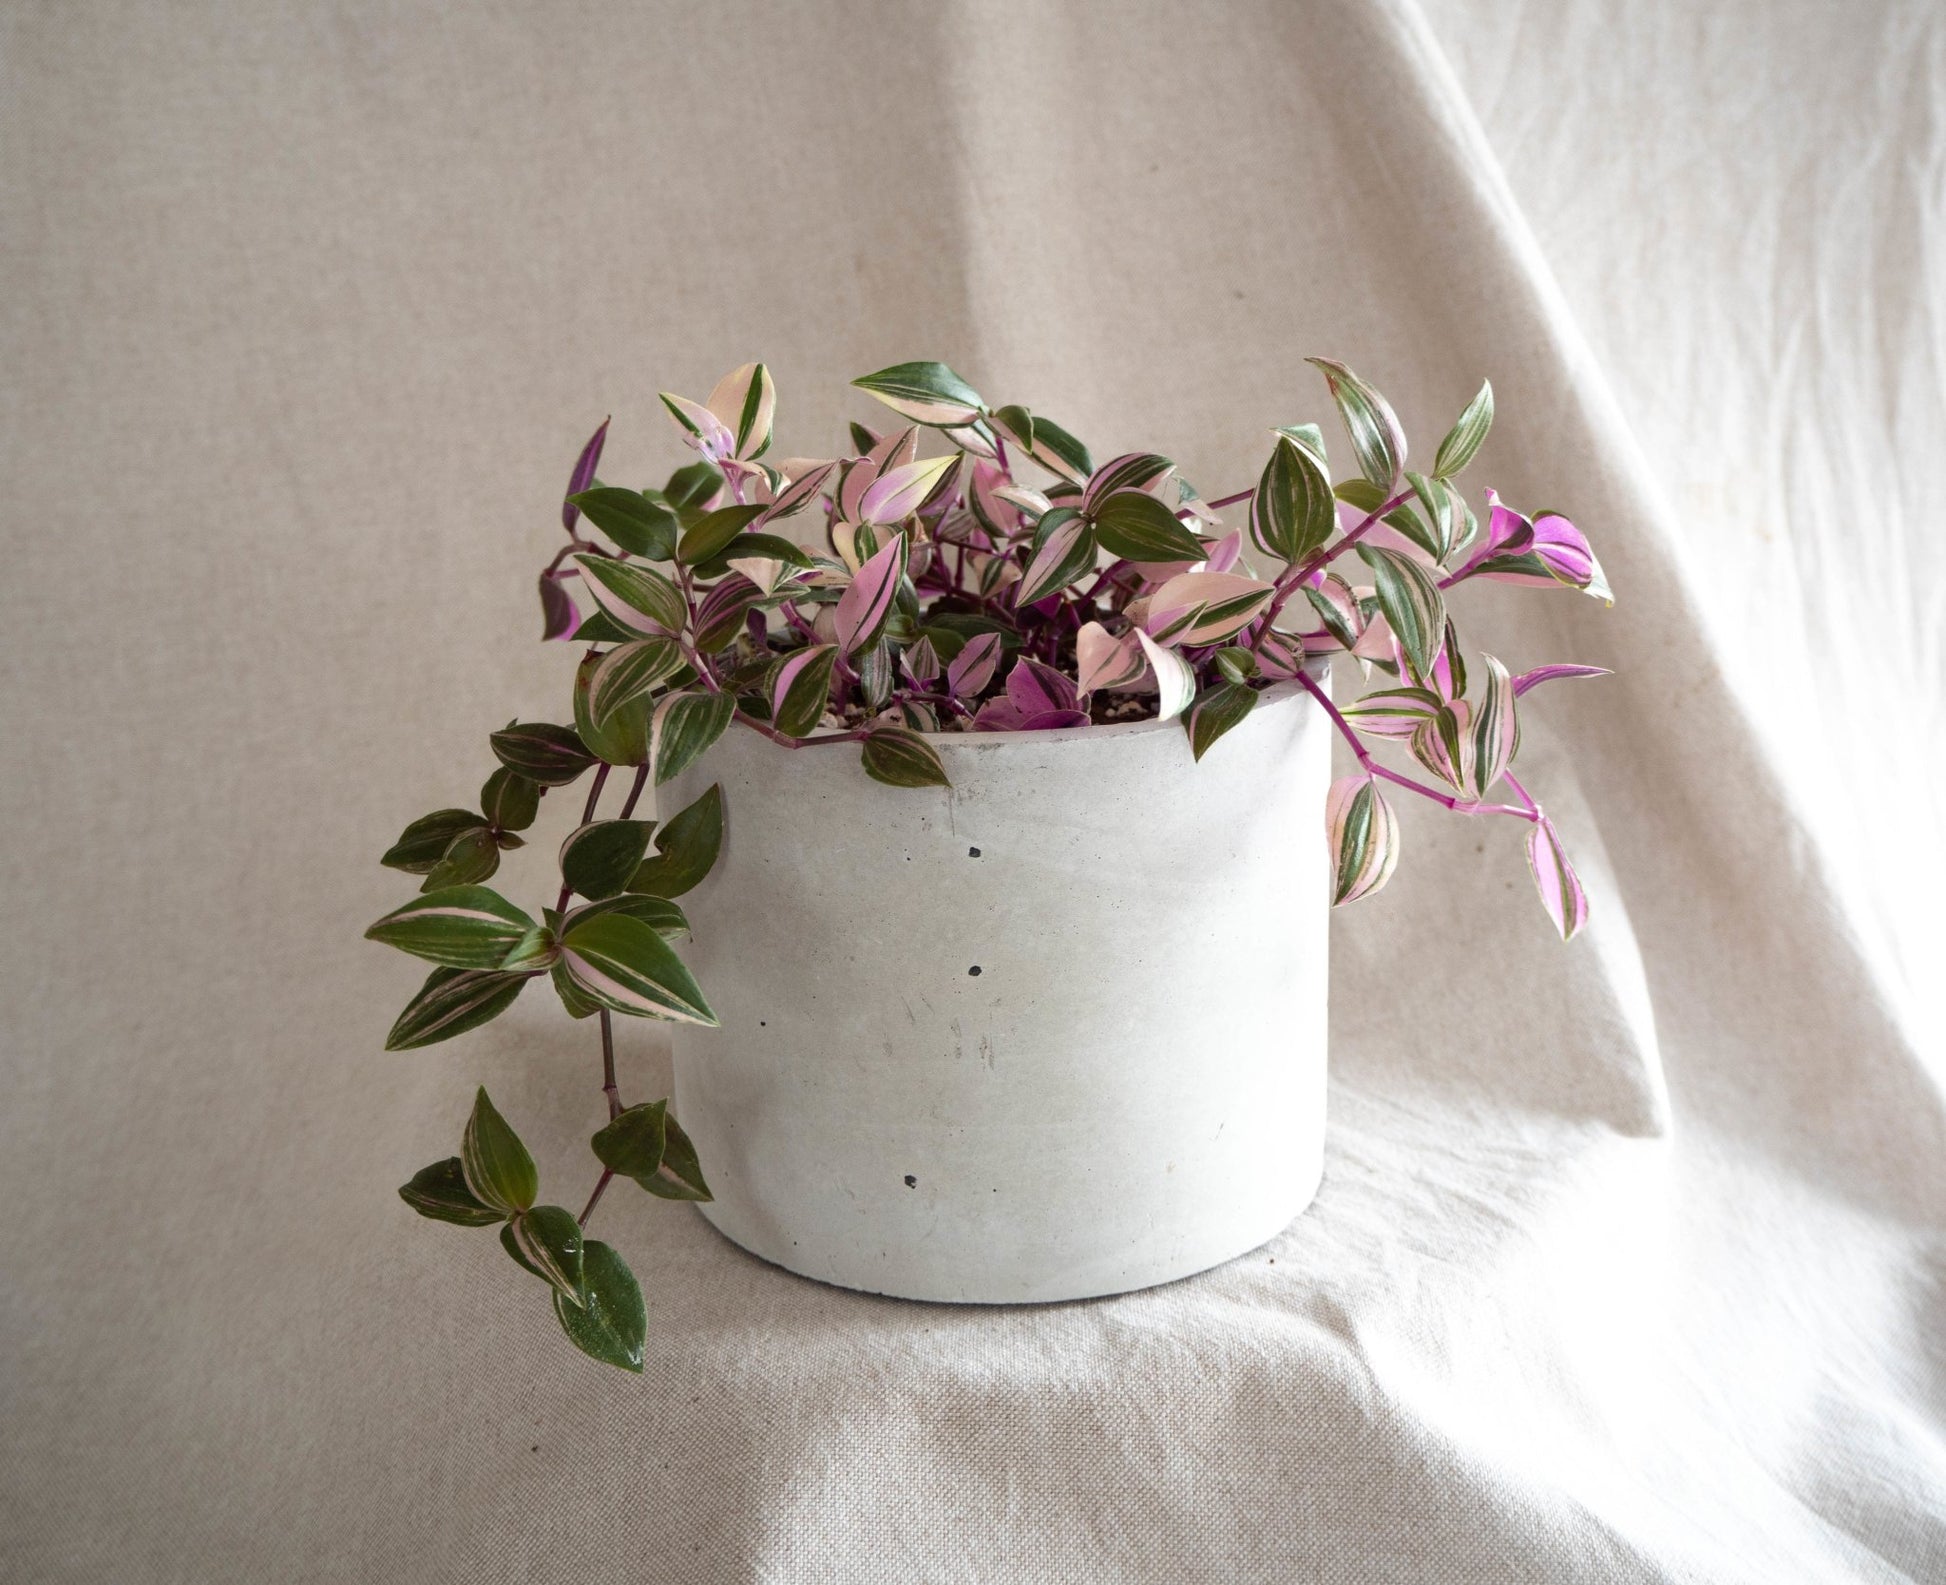 Pot with Plant - Tradescantia - Forest InteriorPlant with Pot